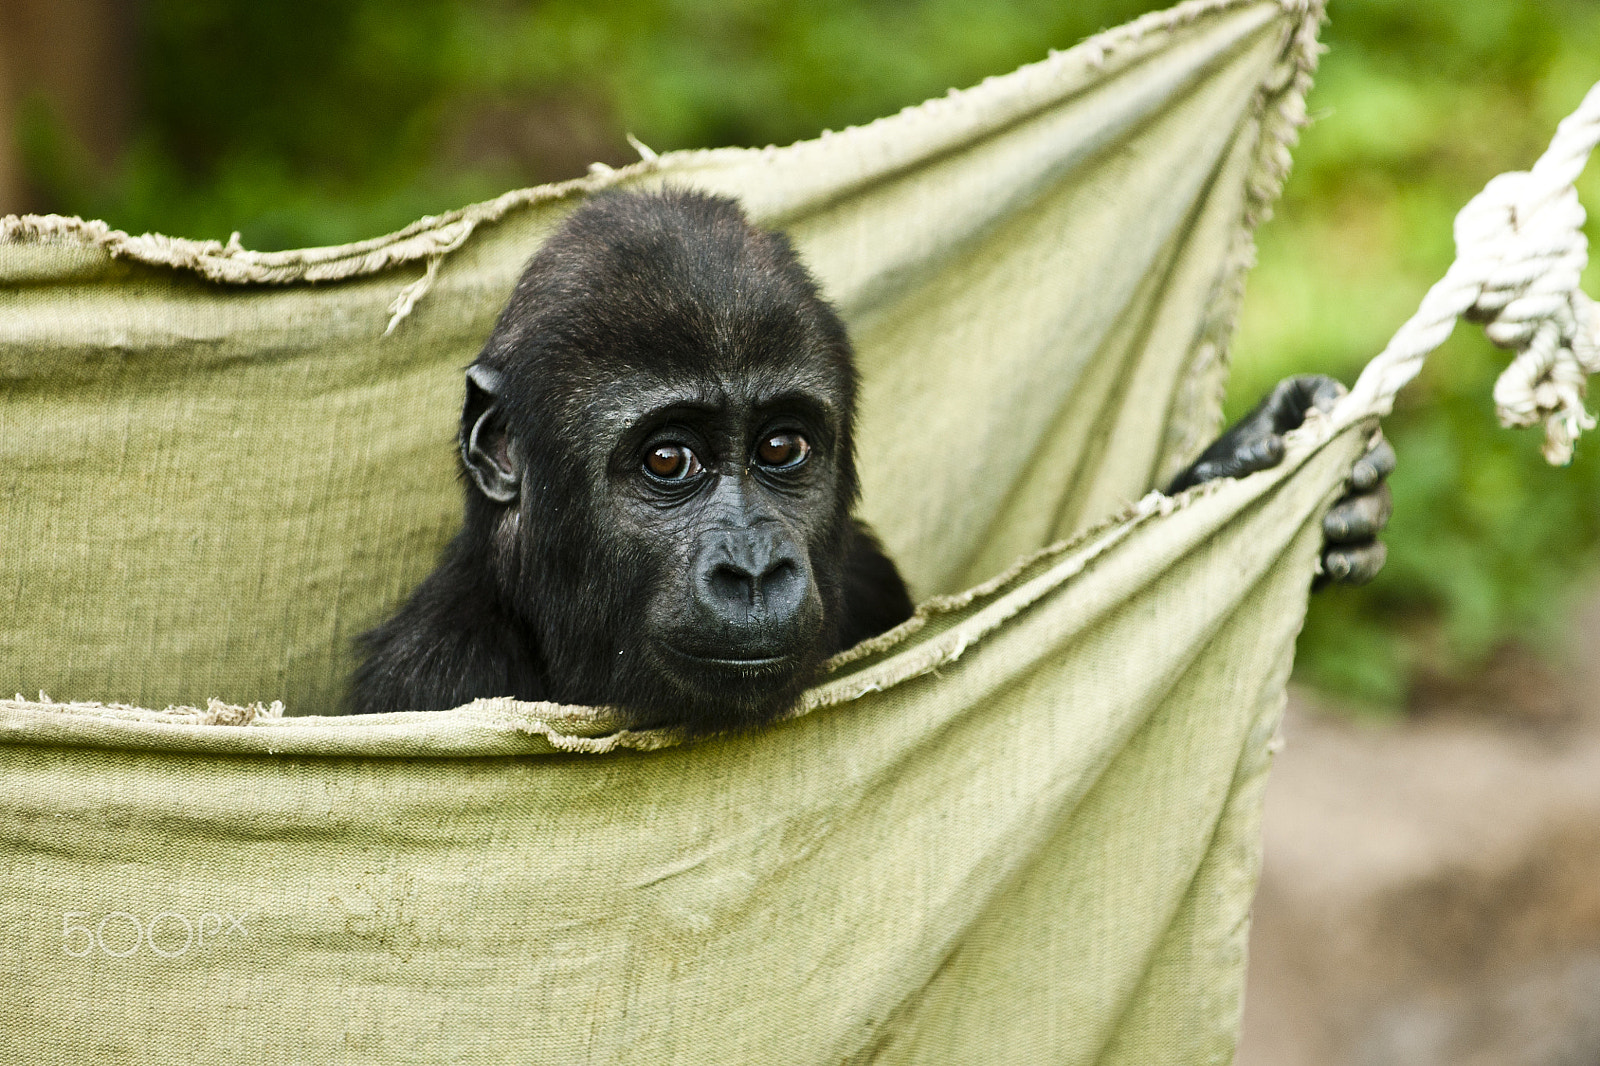 Sony Alpha DSLR-A700 sample photo. Gorilla baby in the bag photography